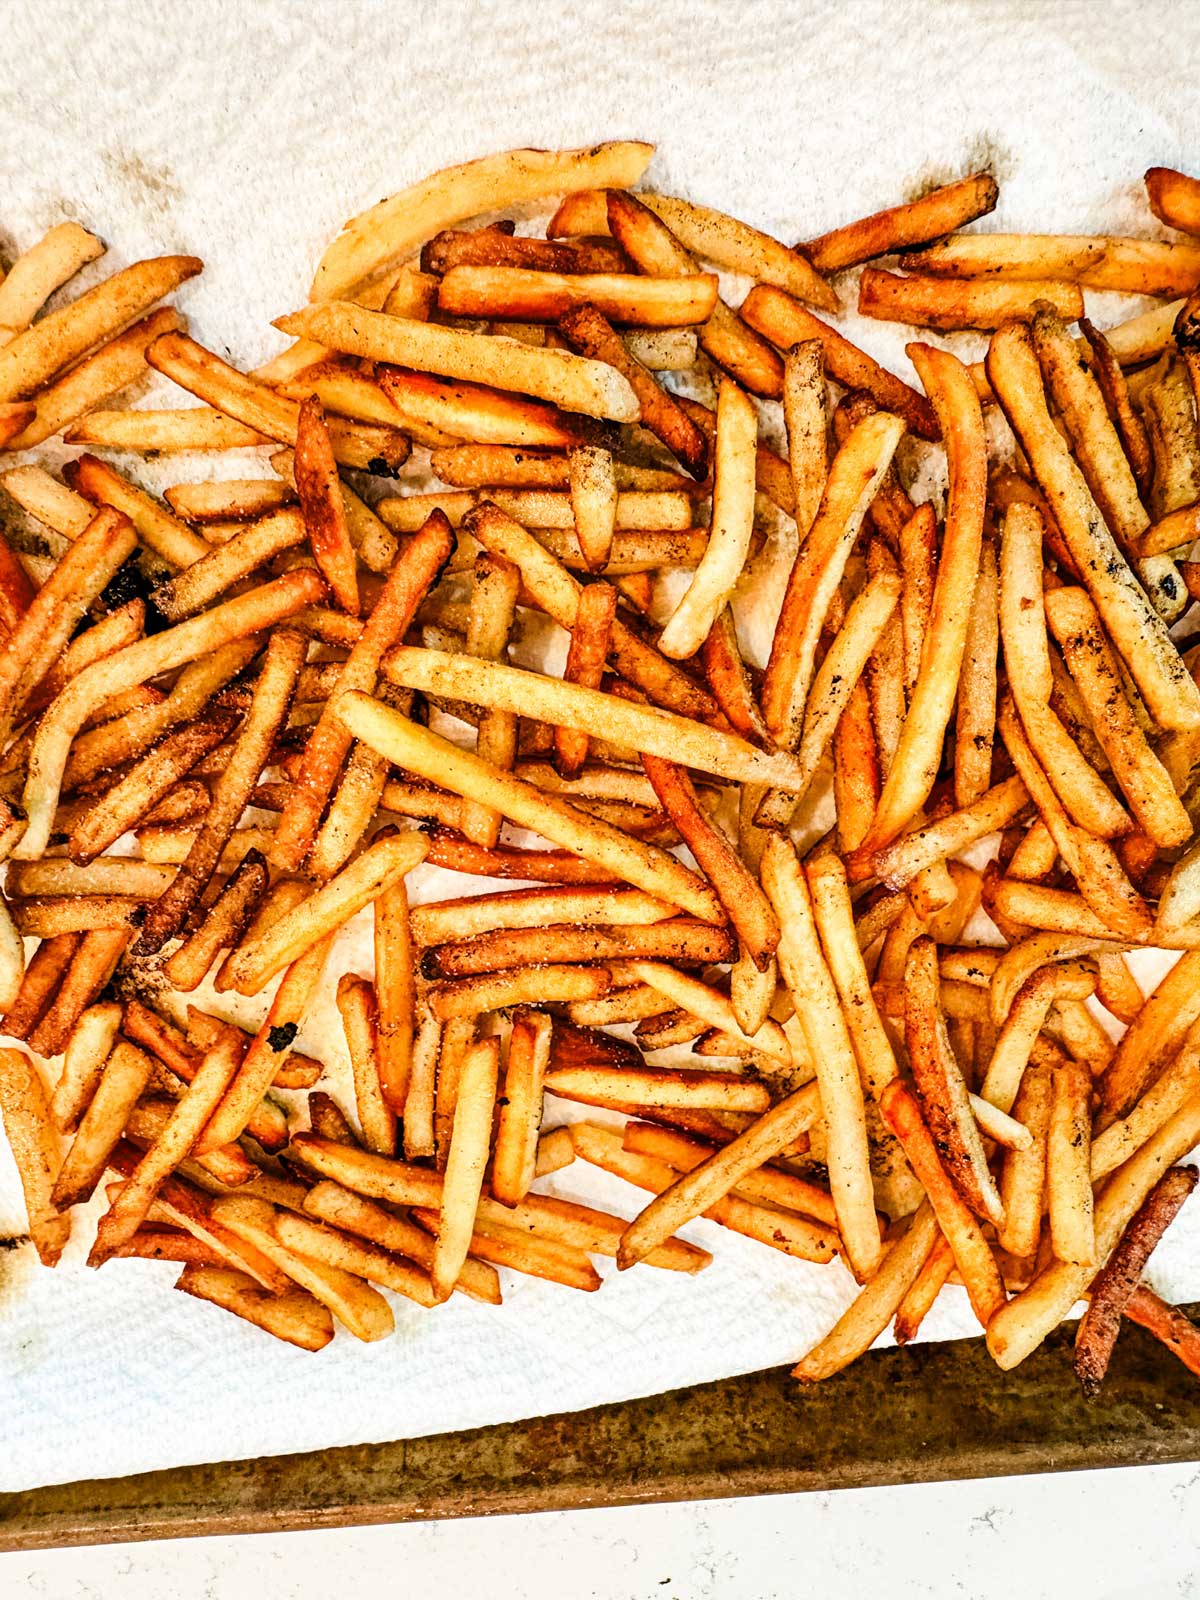 French fries on a paper towel lined baking sheet.